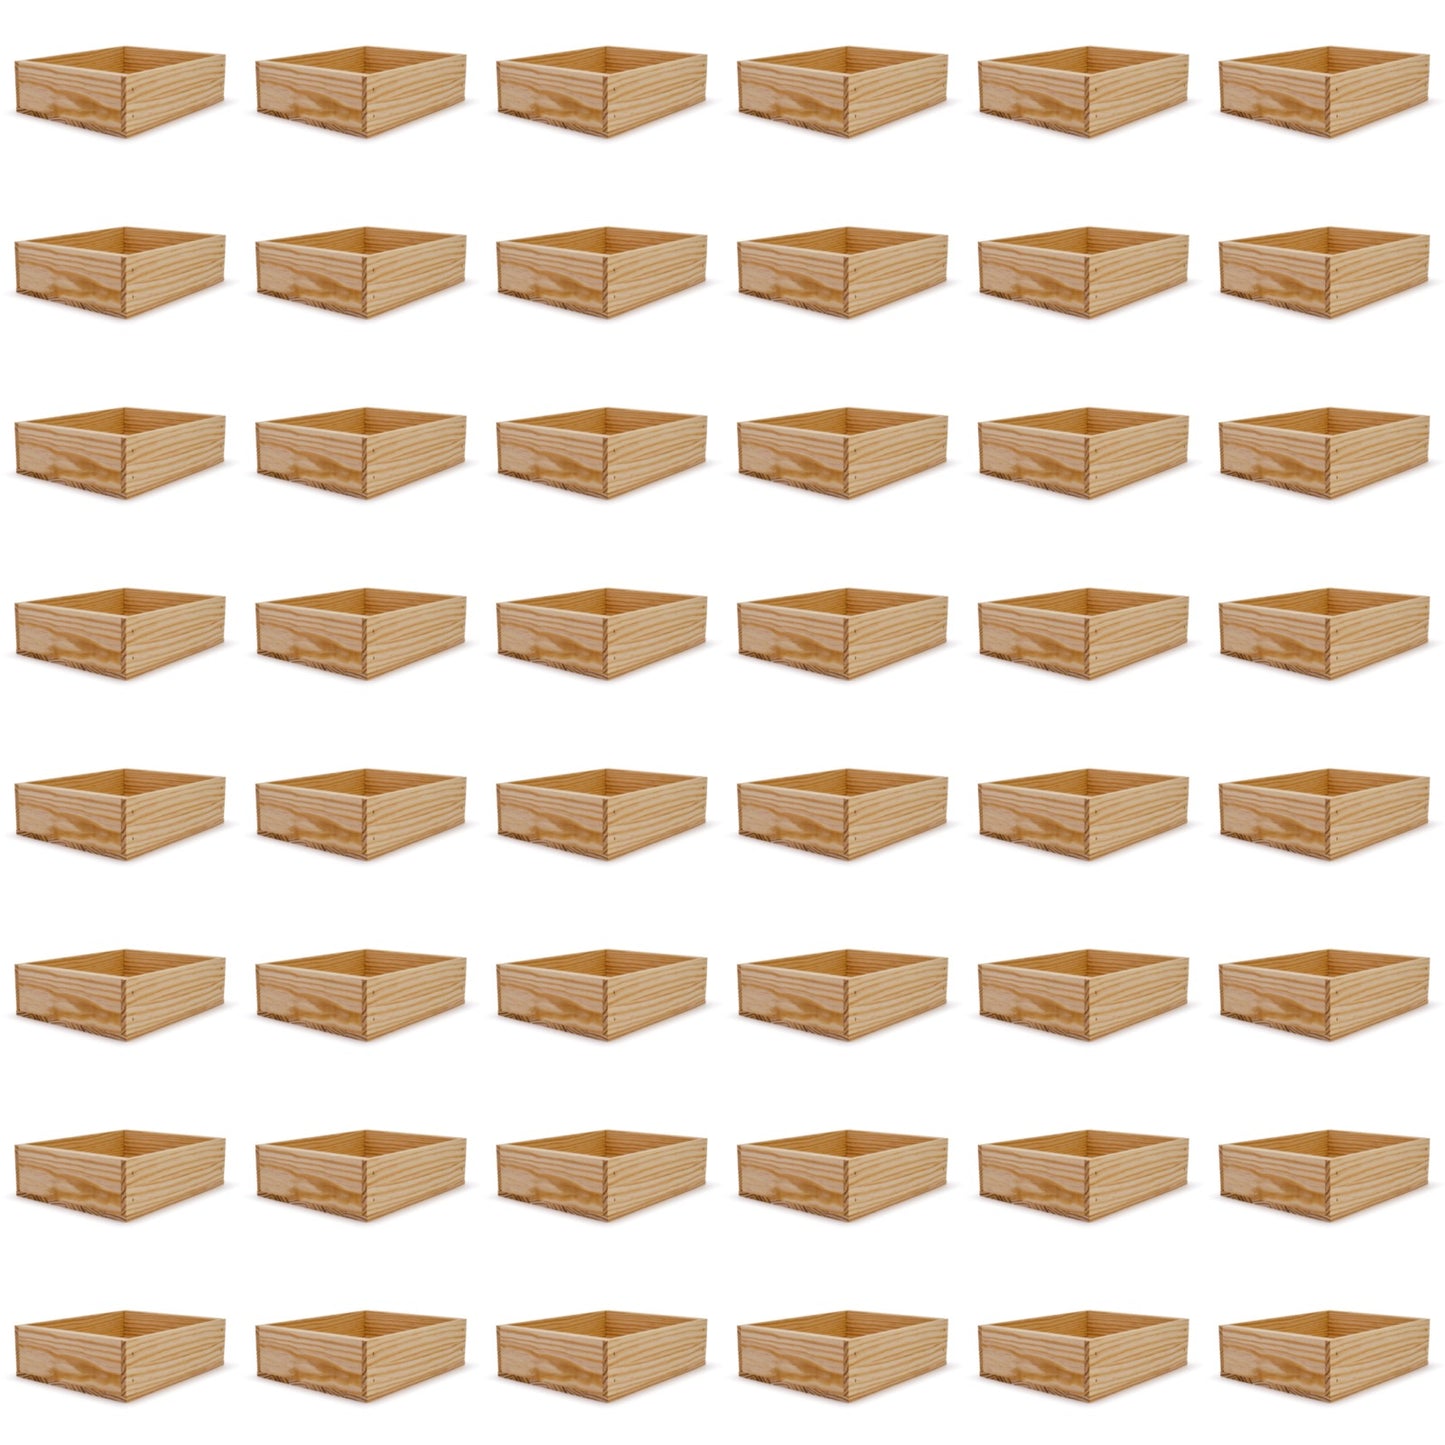 48 Small wooden crates 12x9.75x3.5